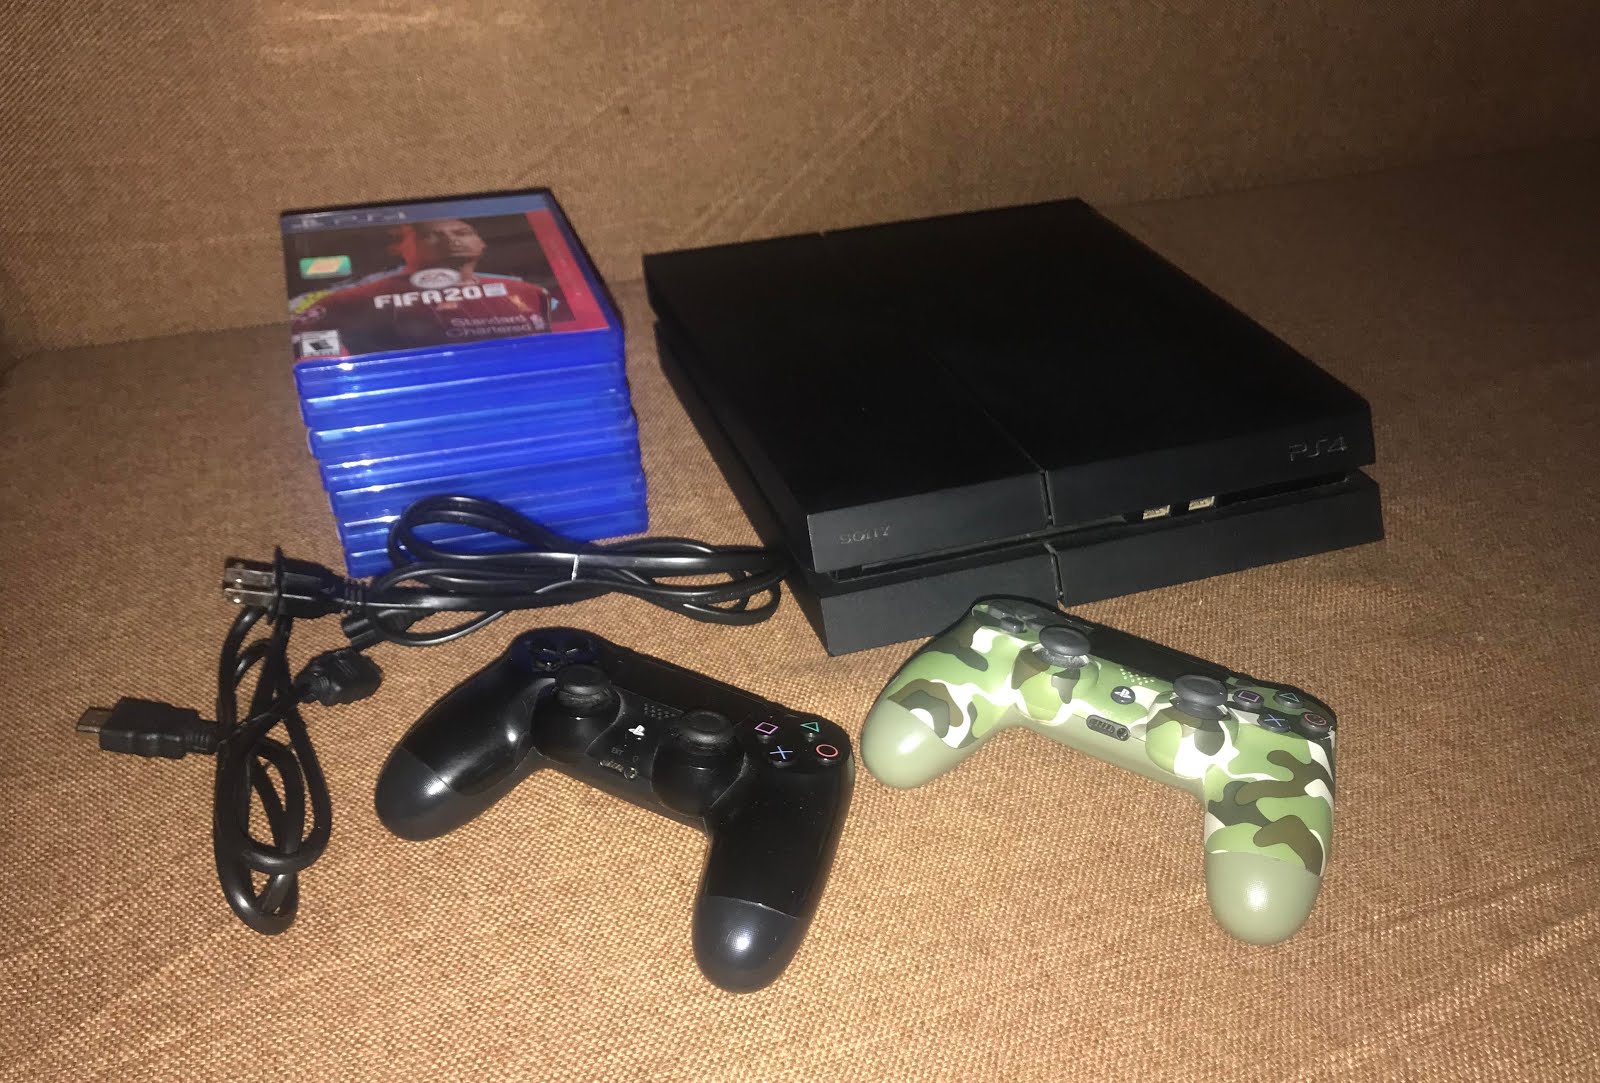 sell used ps4 games